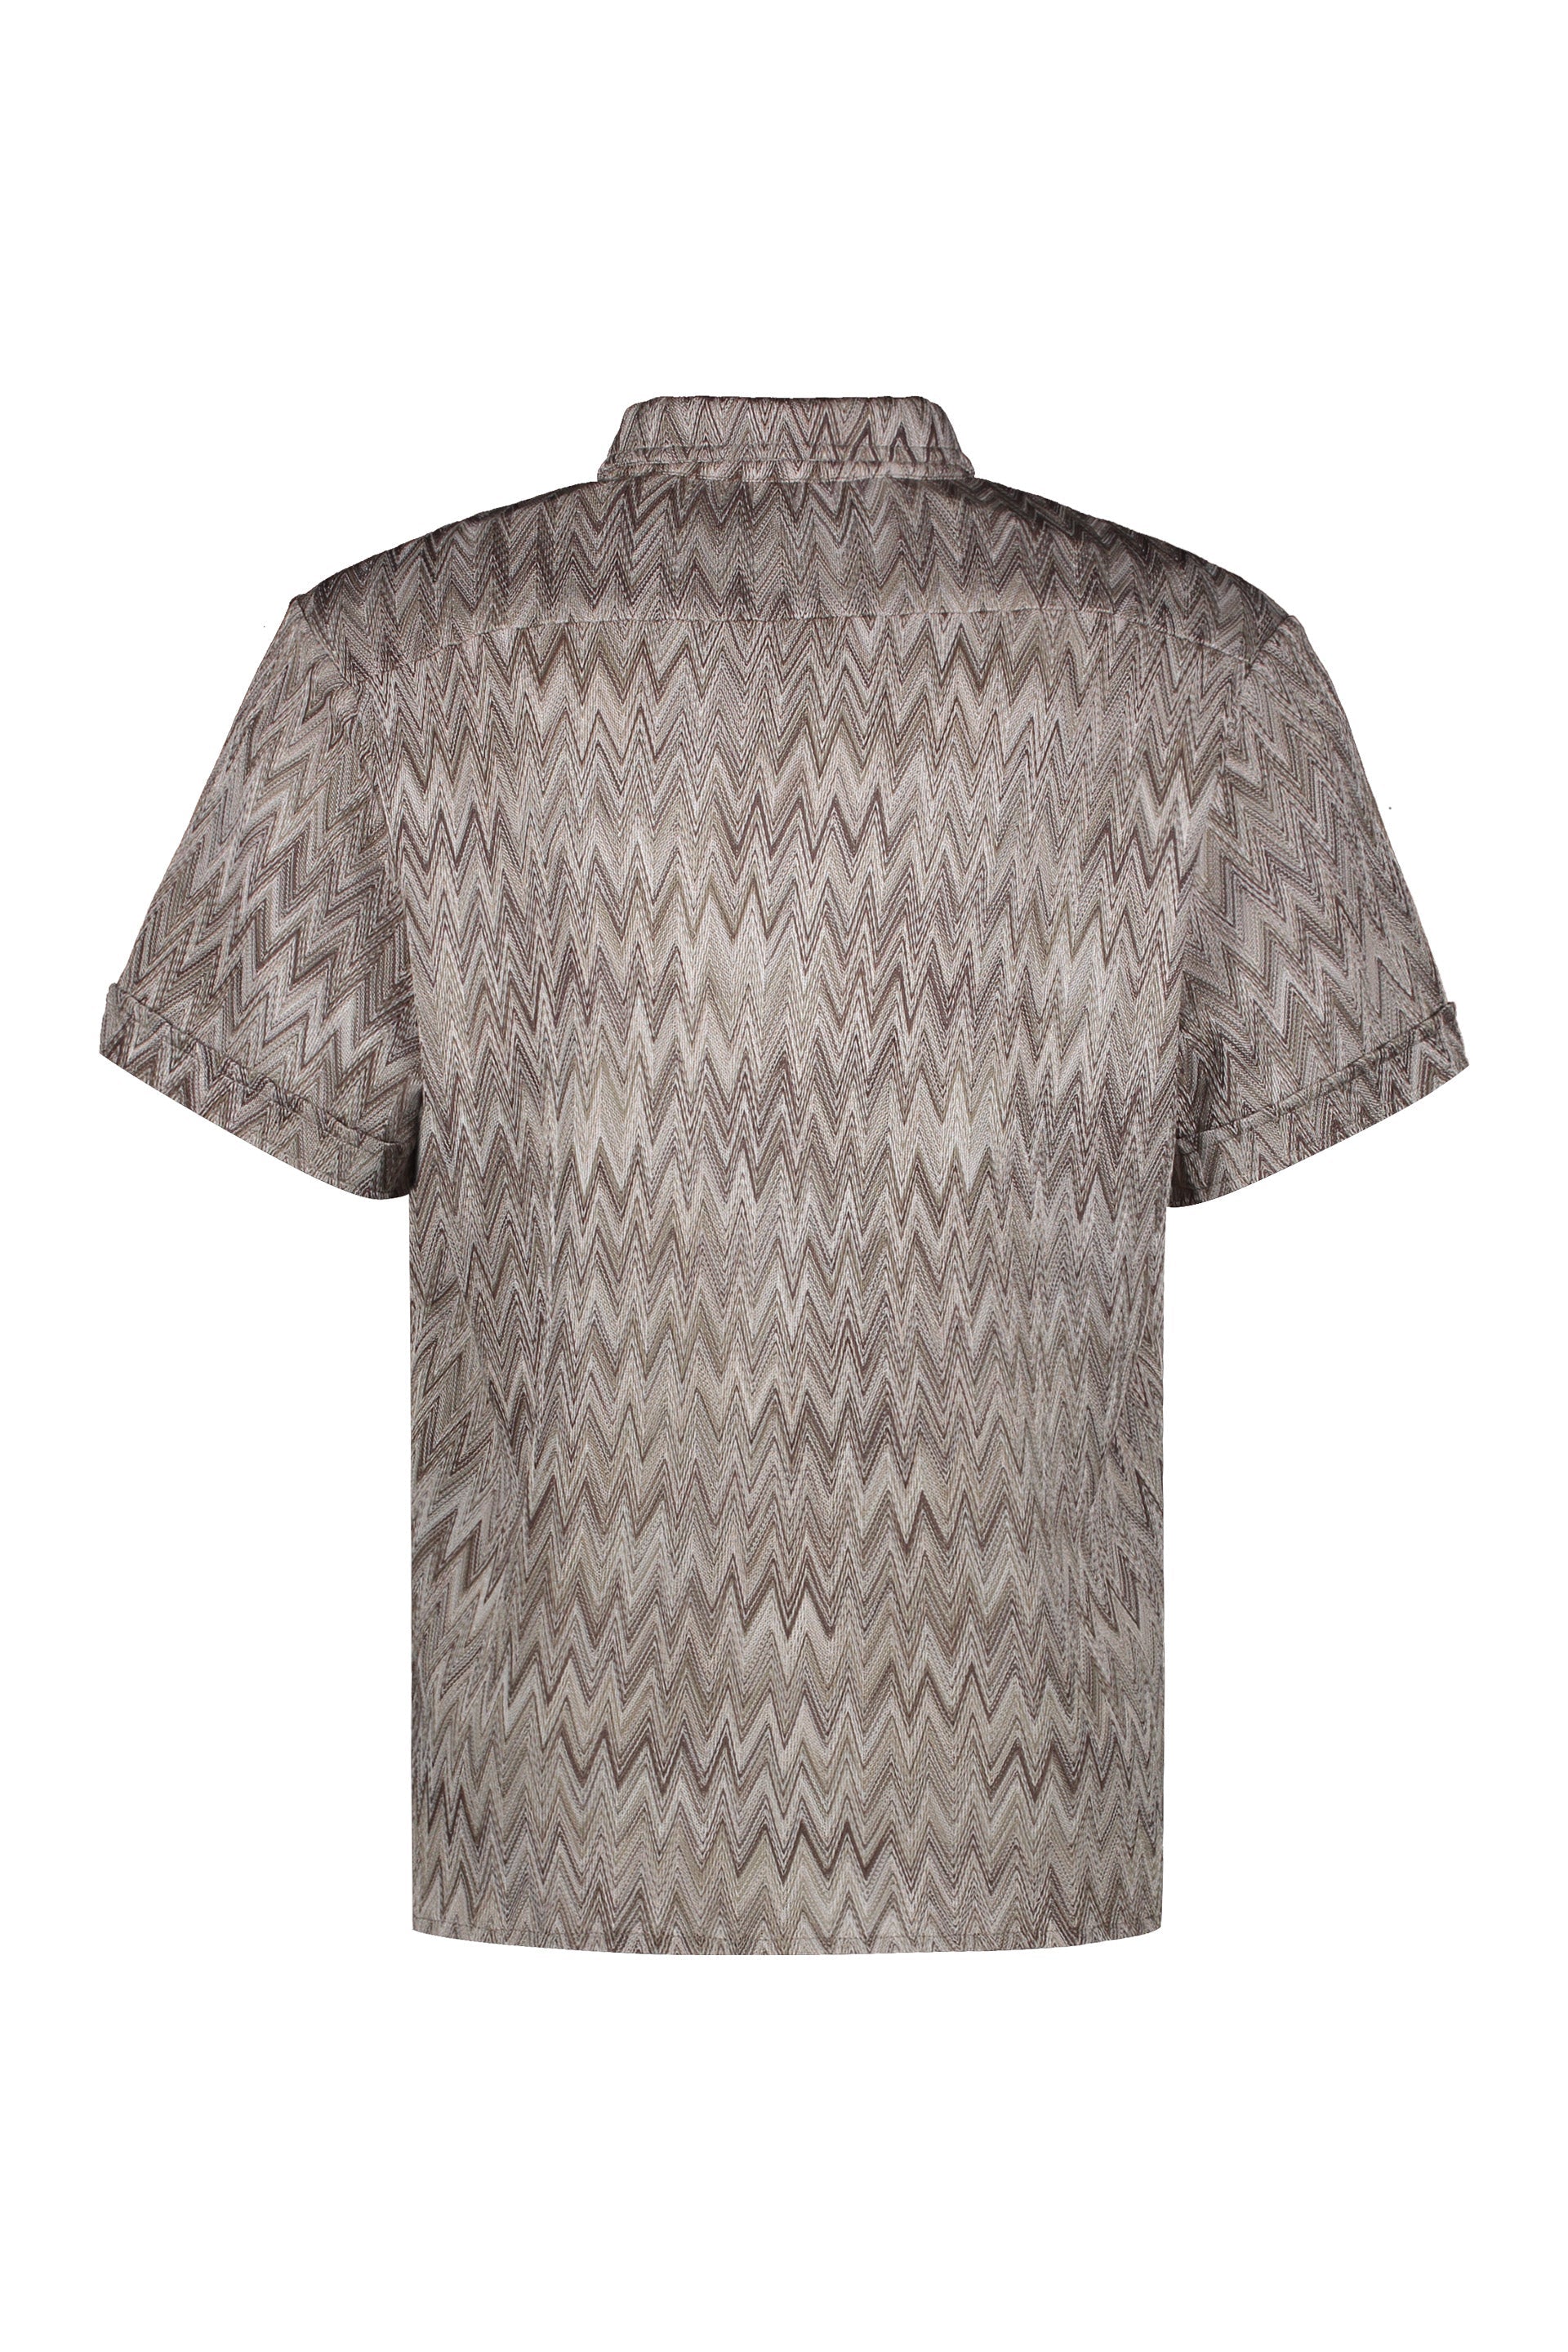 Missoni-OUTLET-SALE-Short-sleeve-shirt-Shirts-L-ARCHIVE-COLLECTION.jpg